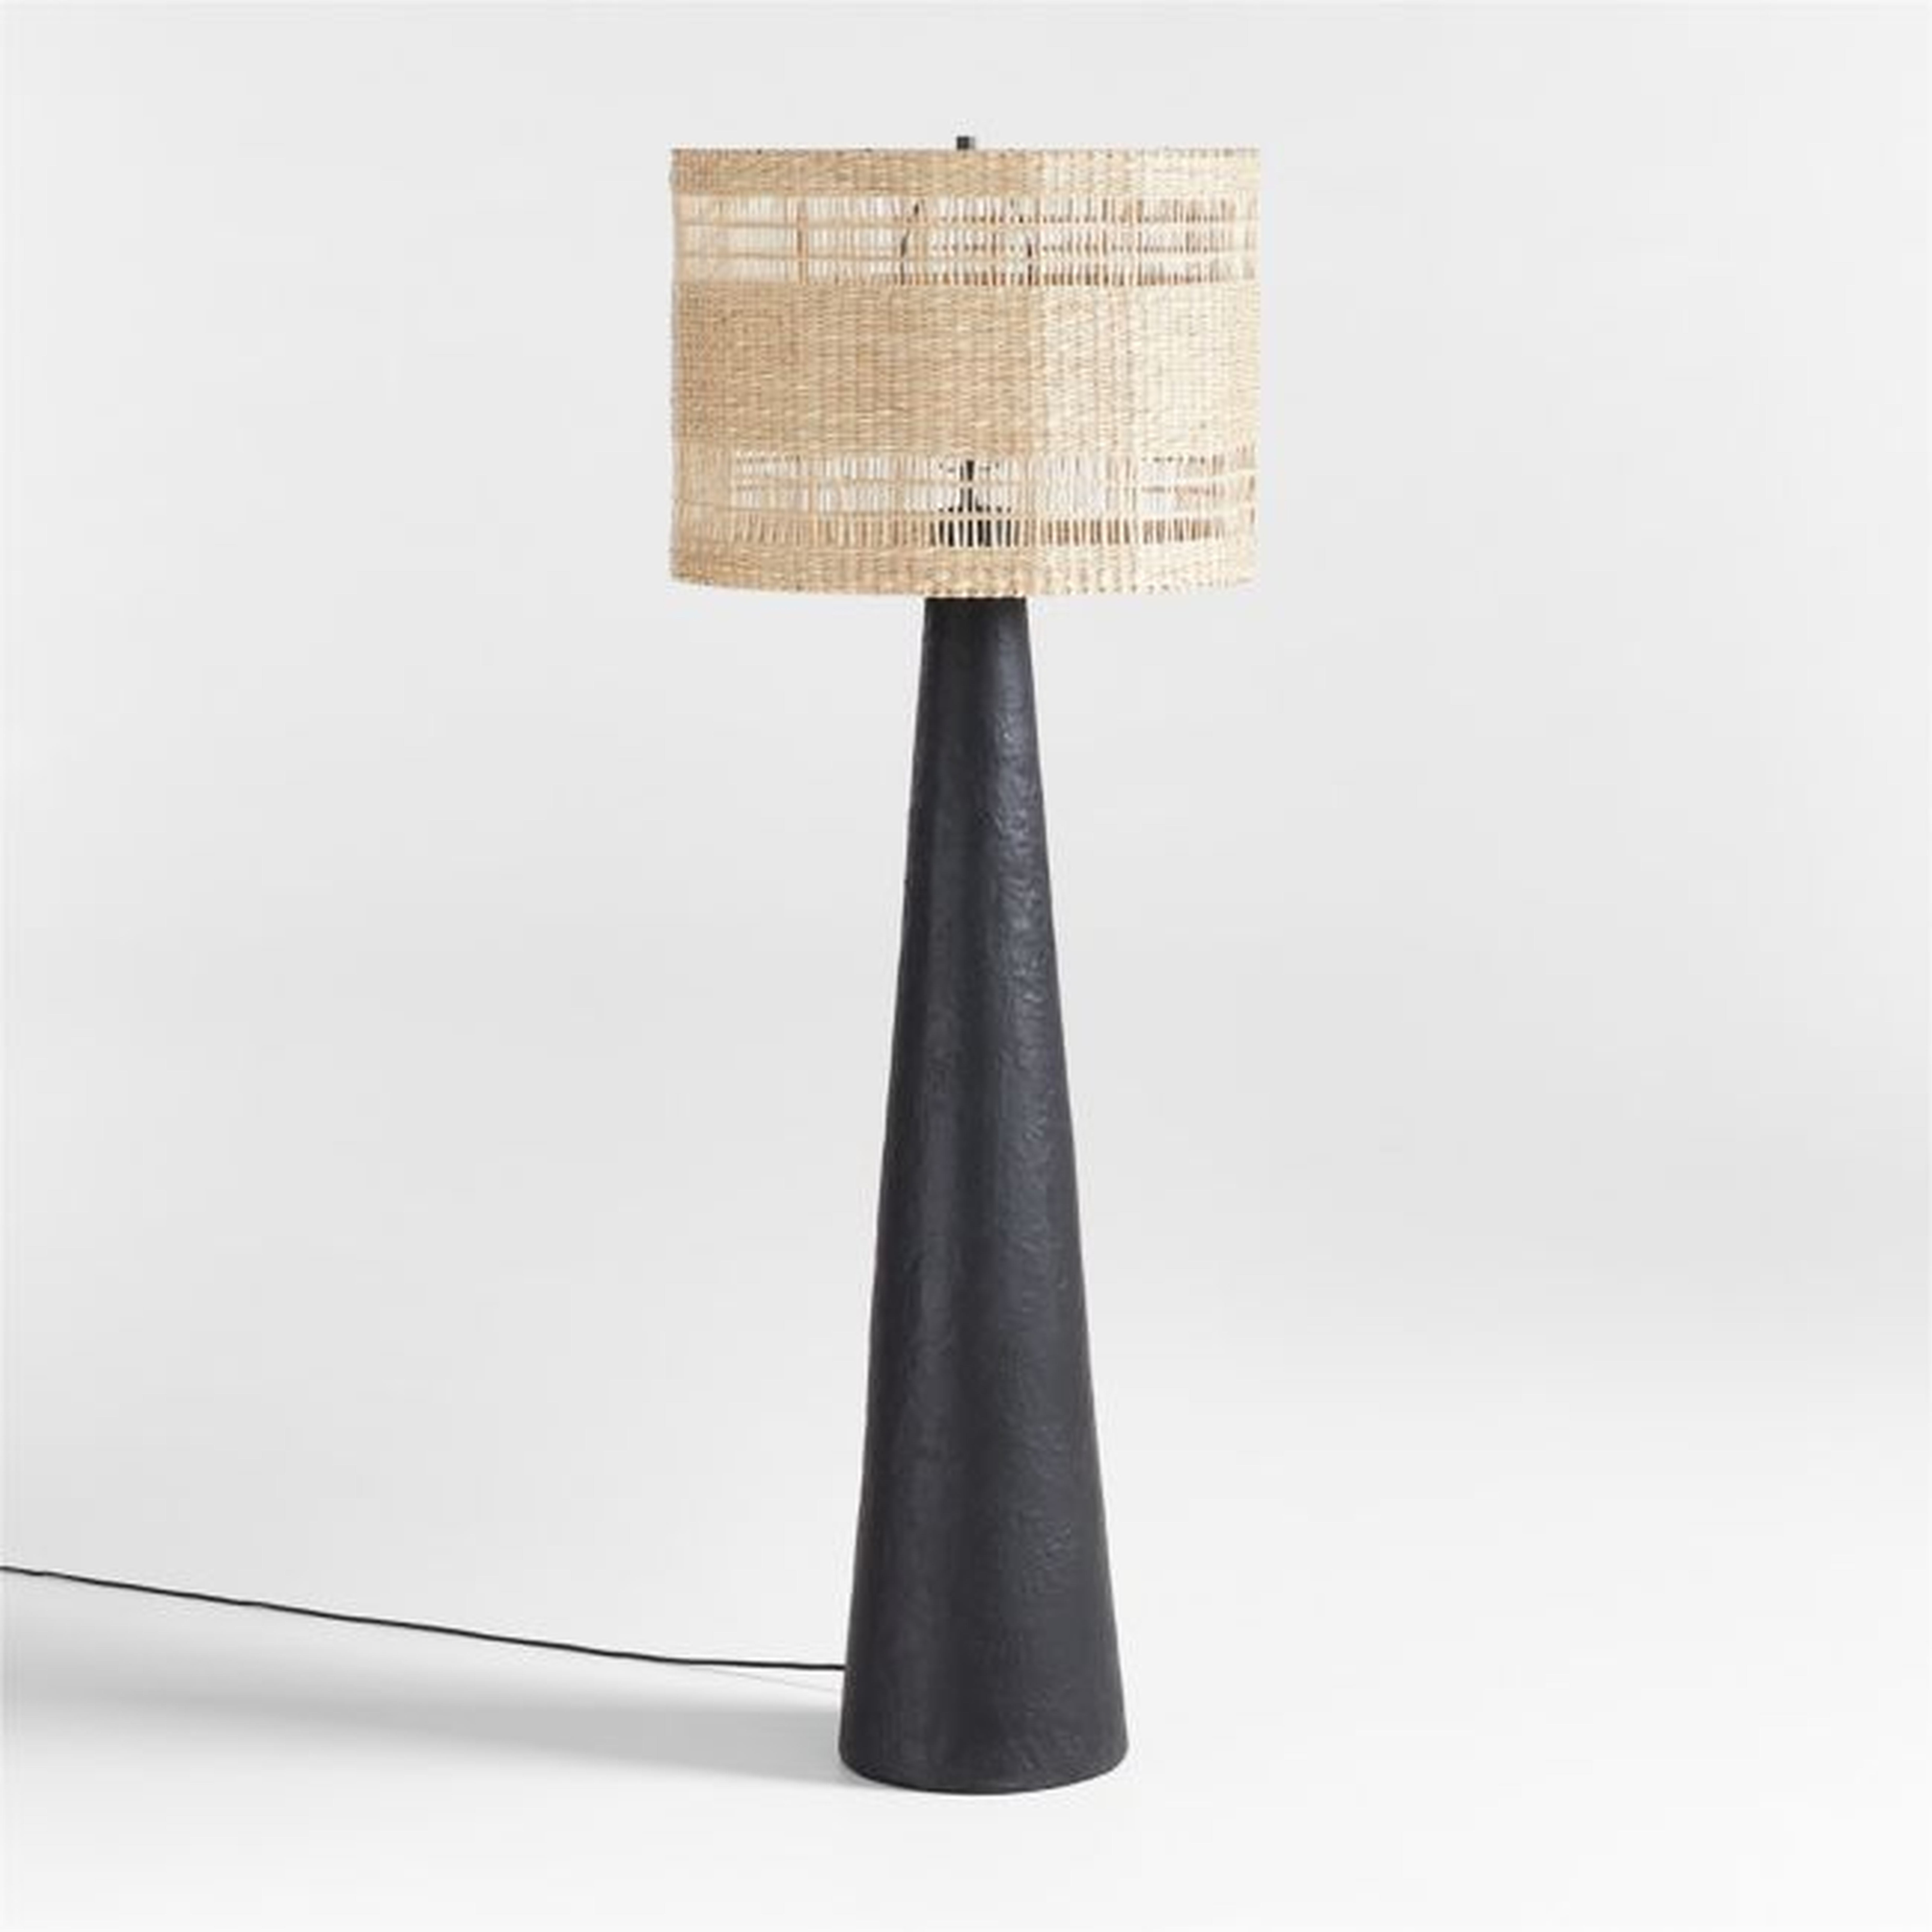 Santorini Black Plaster Floor Lamp with Woven Shade -estimated early December 2023 - Crate and Barrel